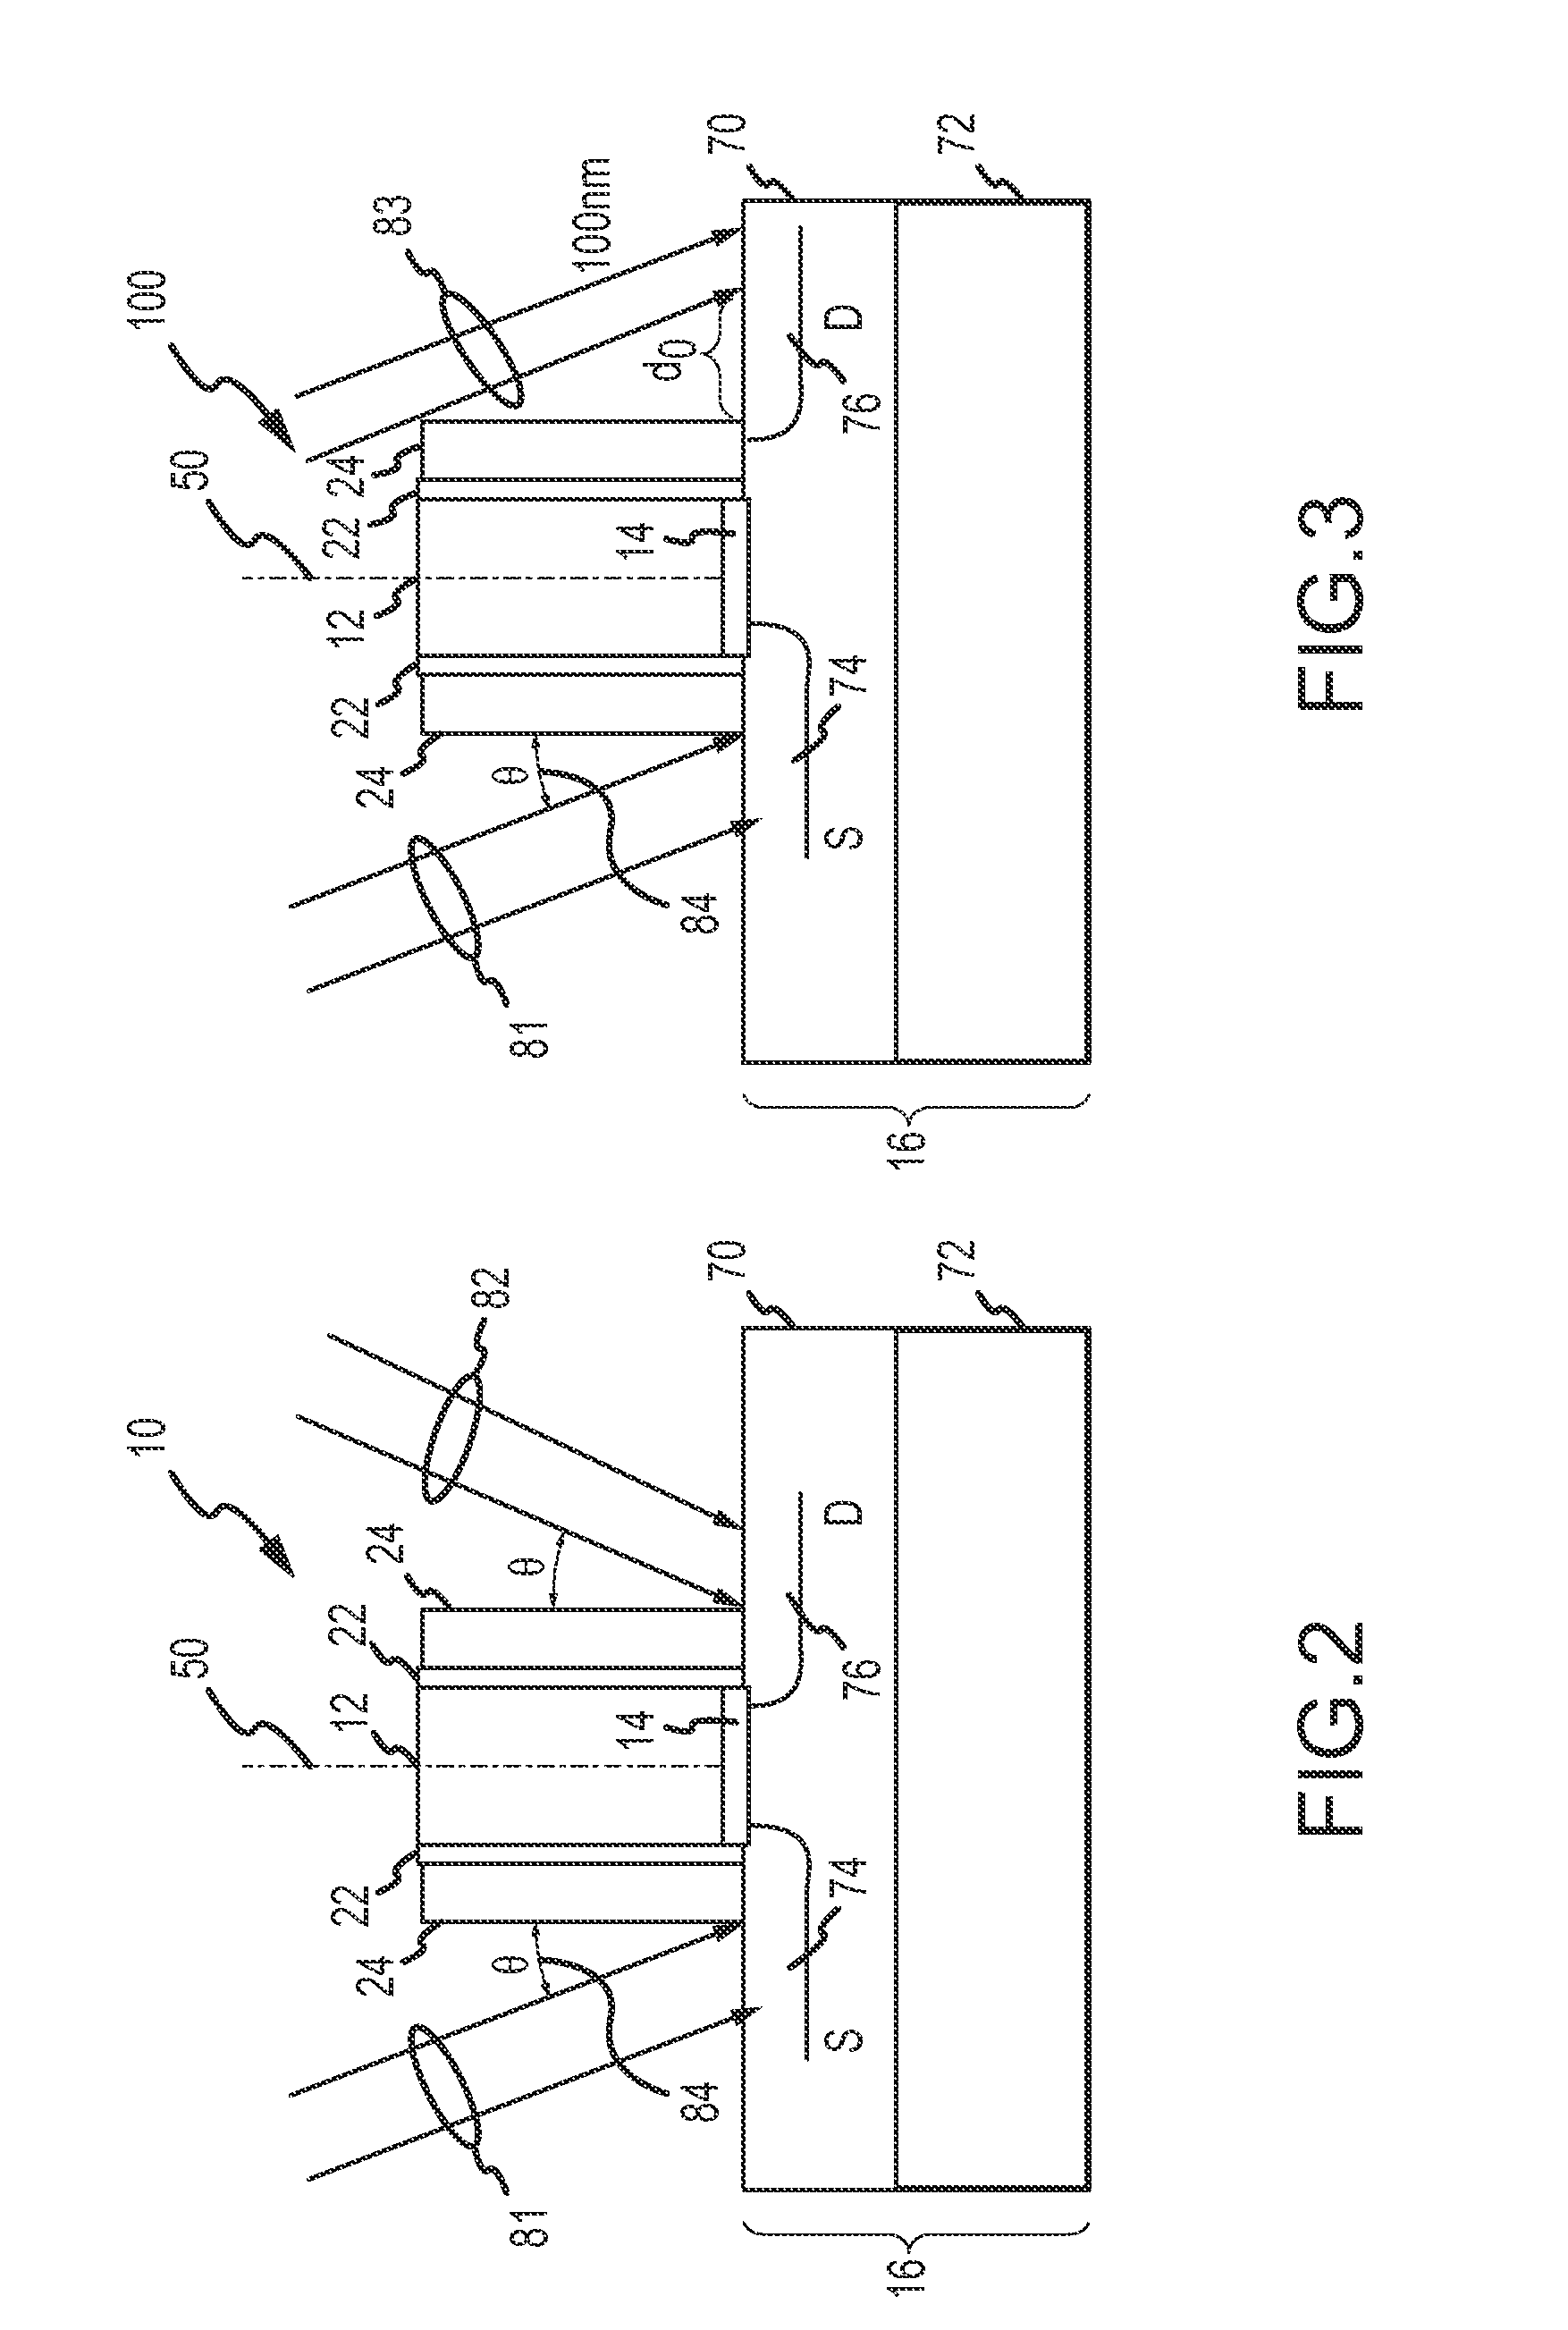 MOSFET with asymmetrical extension implant